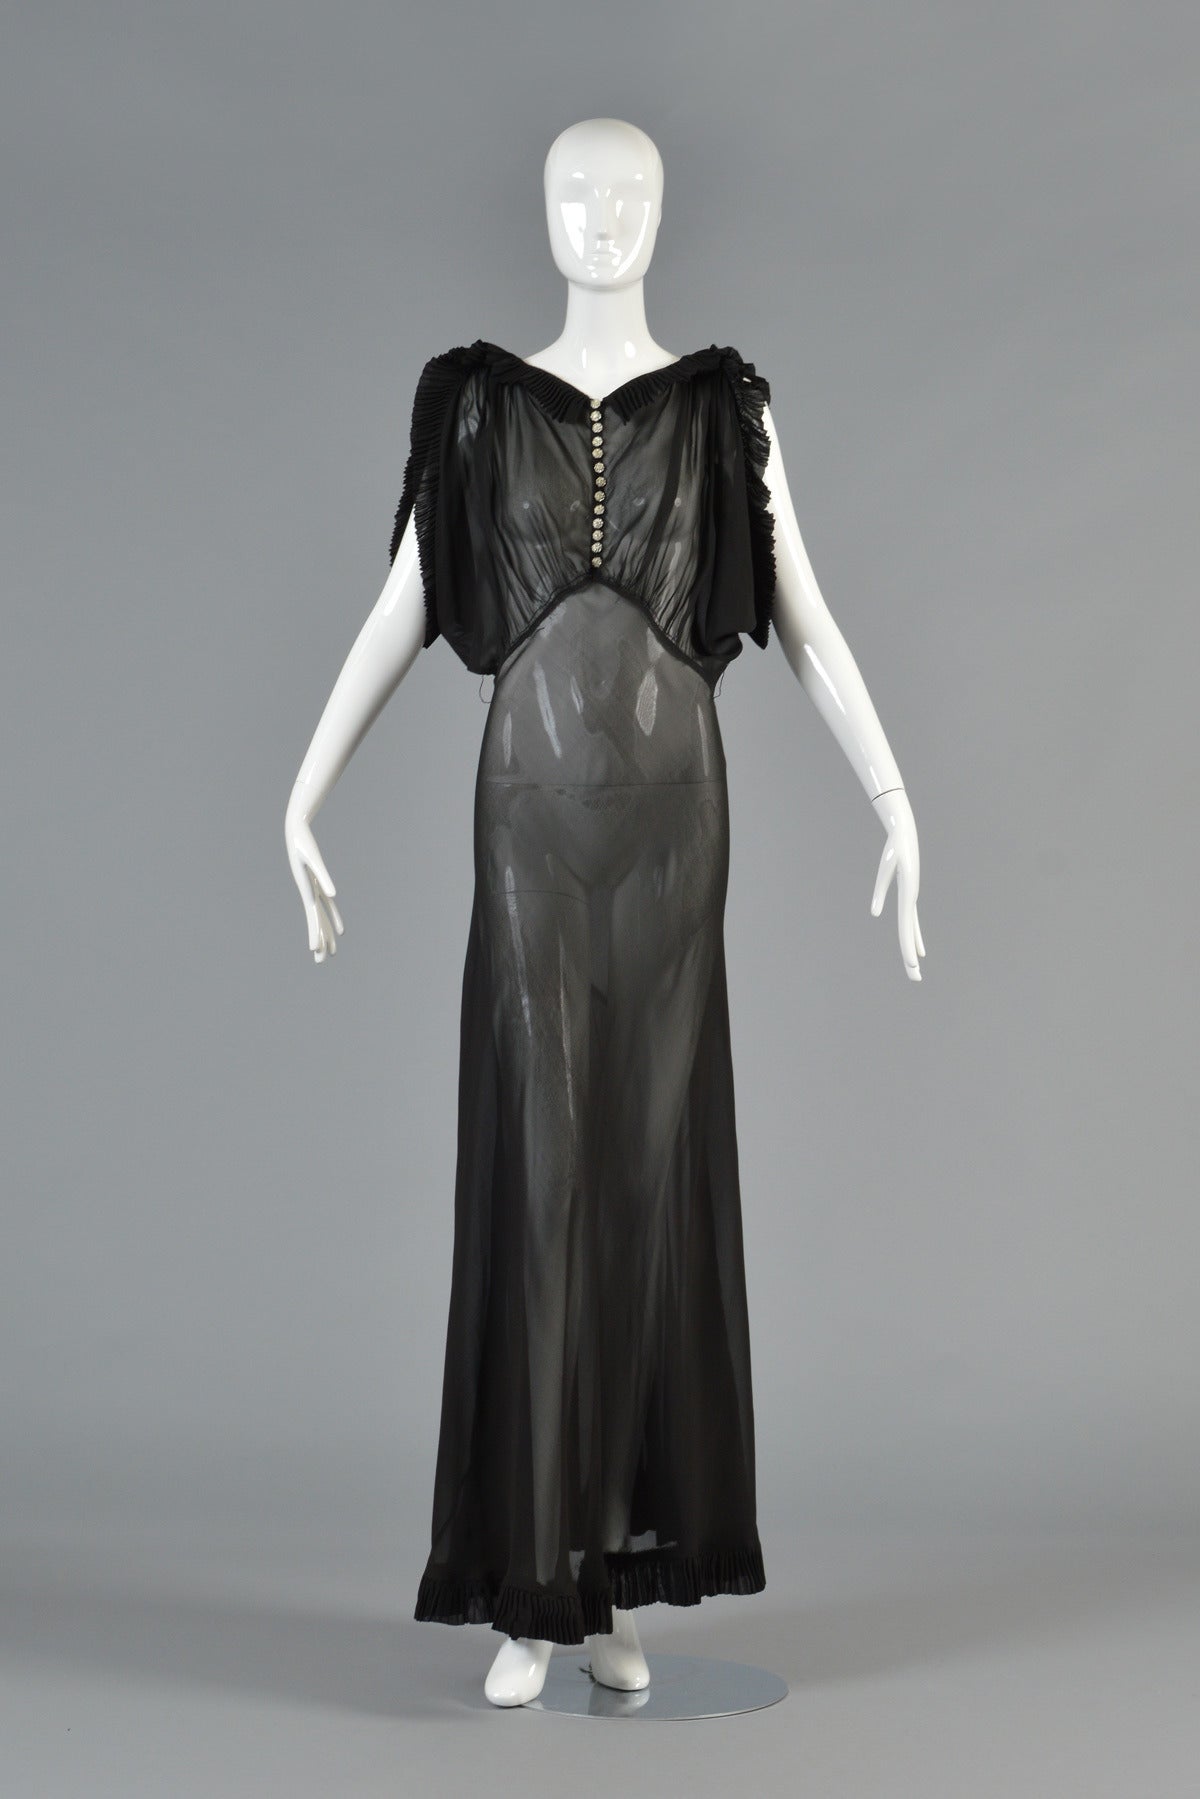 Beautiful 1930's sheer black evening gown. AMAZING construction and so elegant! The dress features a gathered bodice with incredible tiny micropleating around the shoulders, sleeves and hem. Note the avant garde manner in which the pleats stand